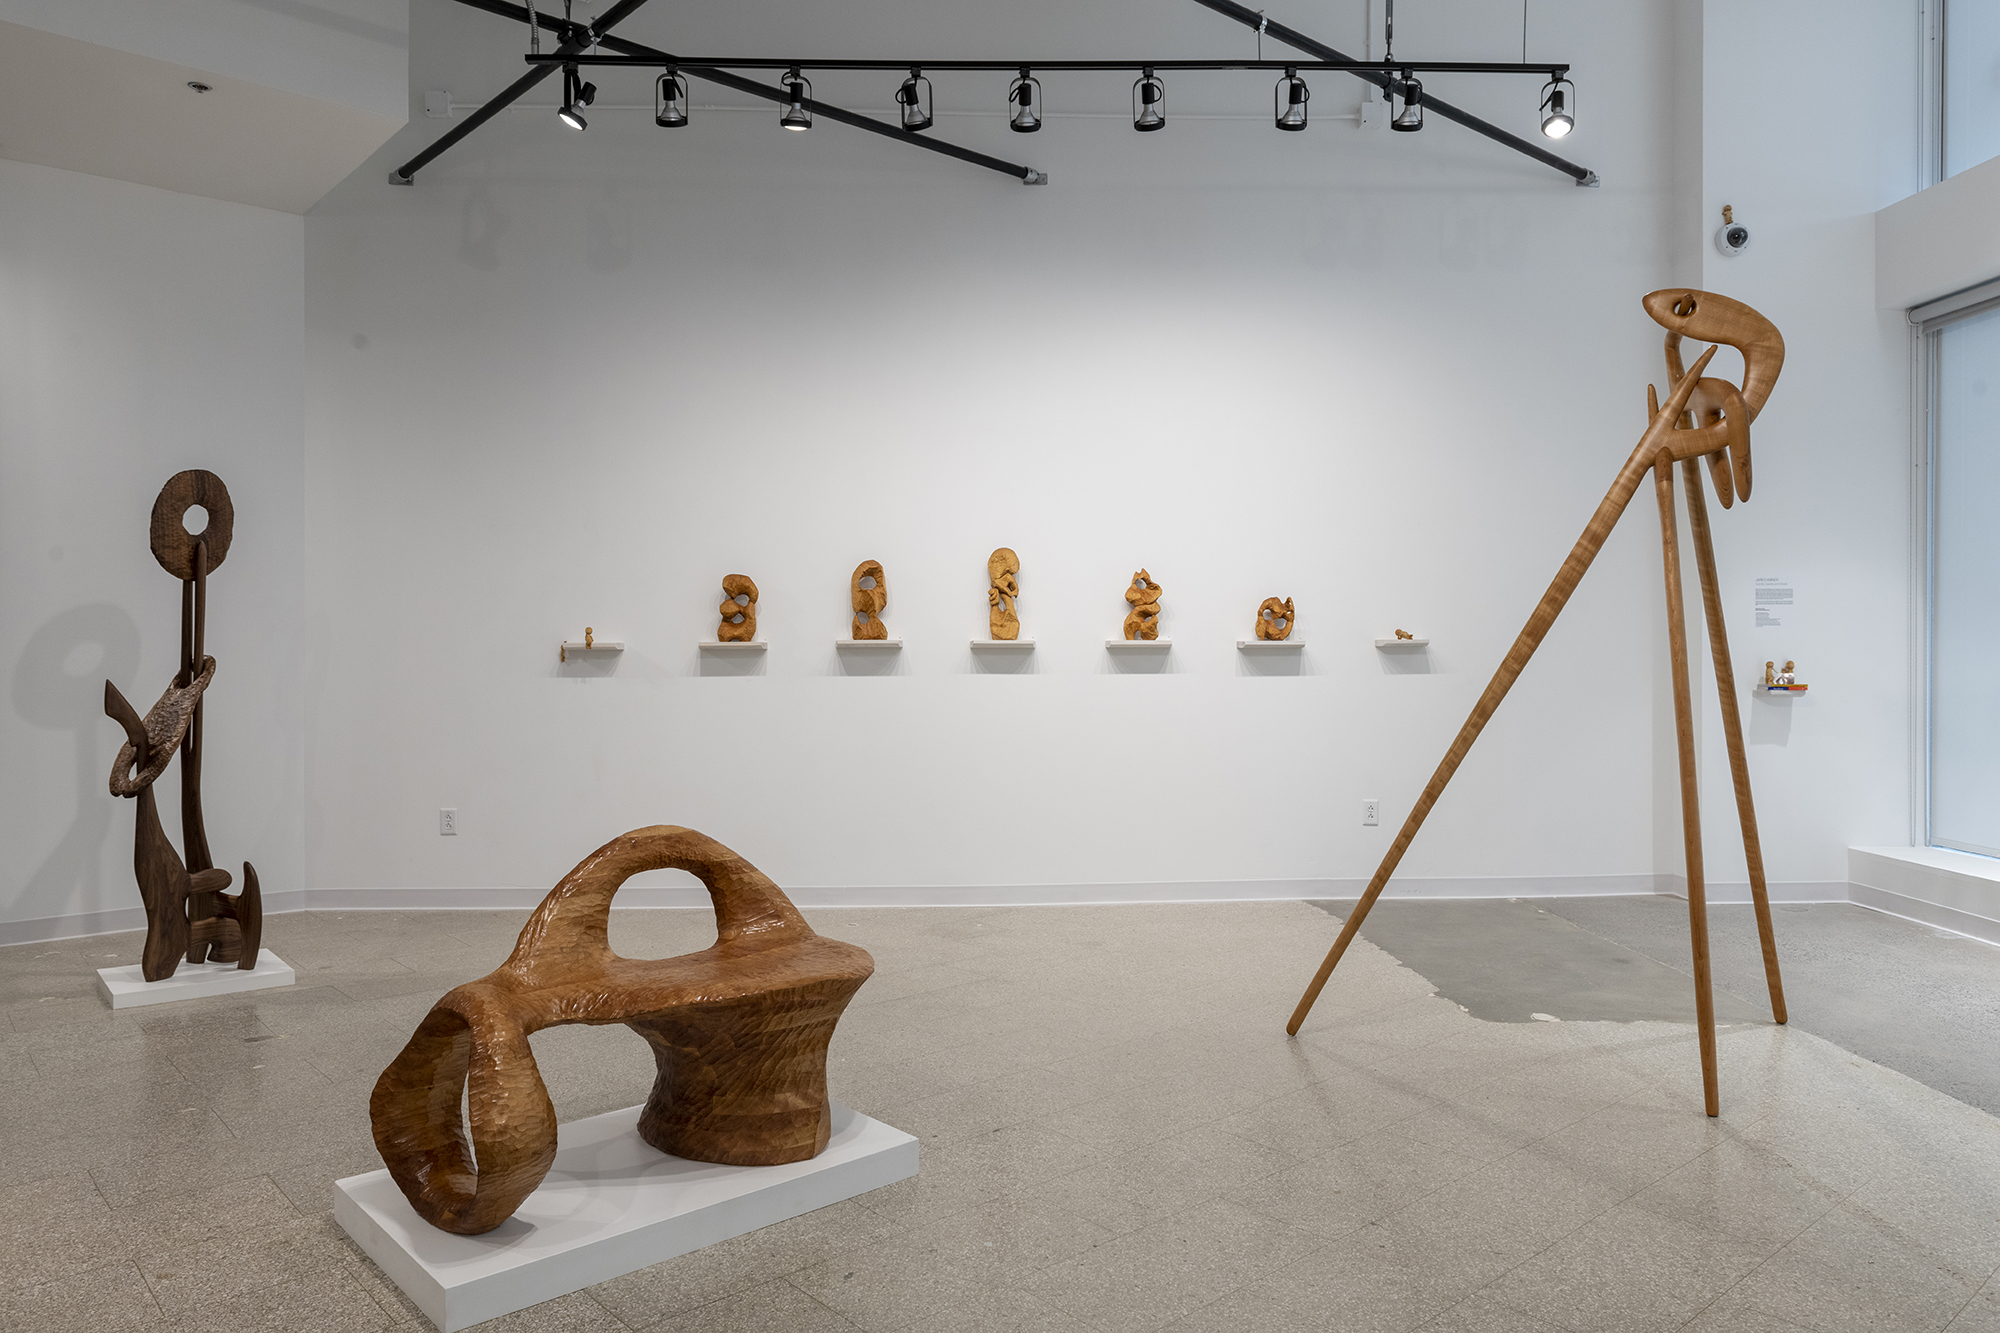 A gallery display of wooden sculptures.